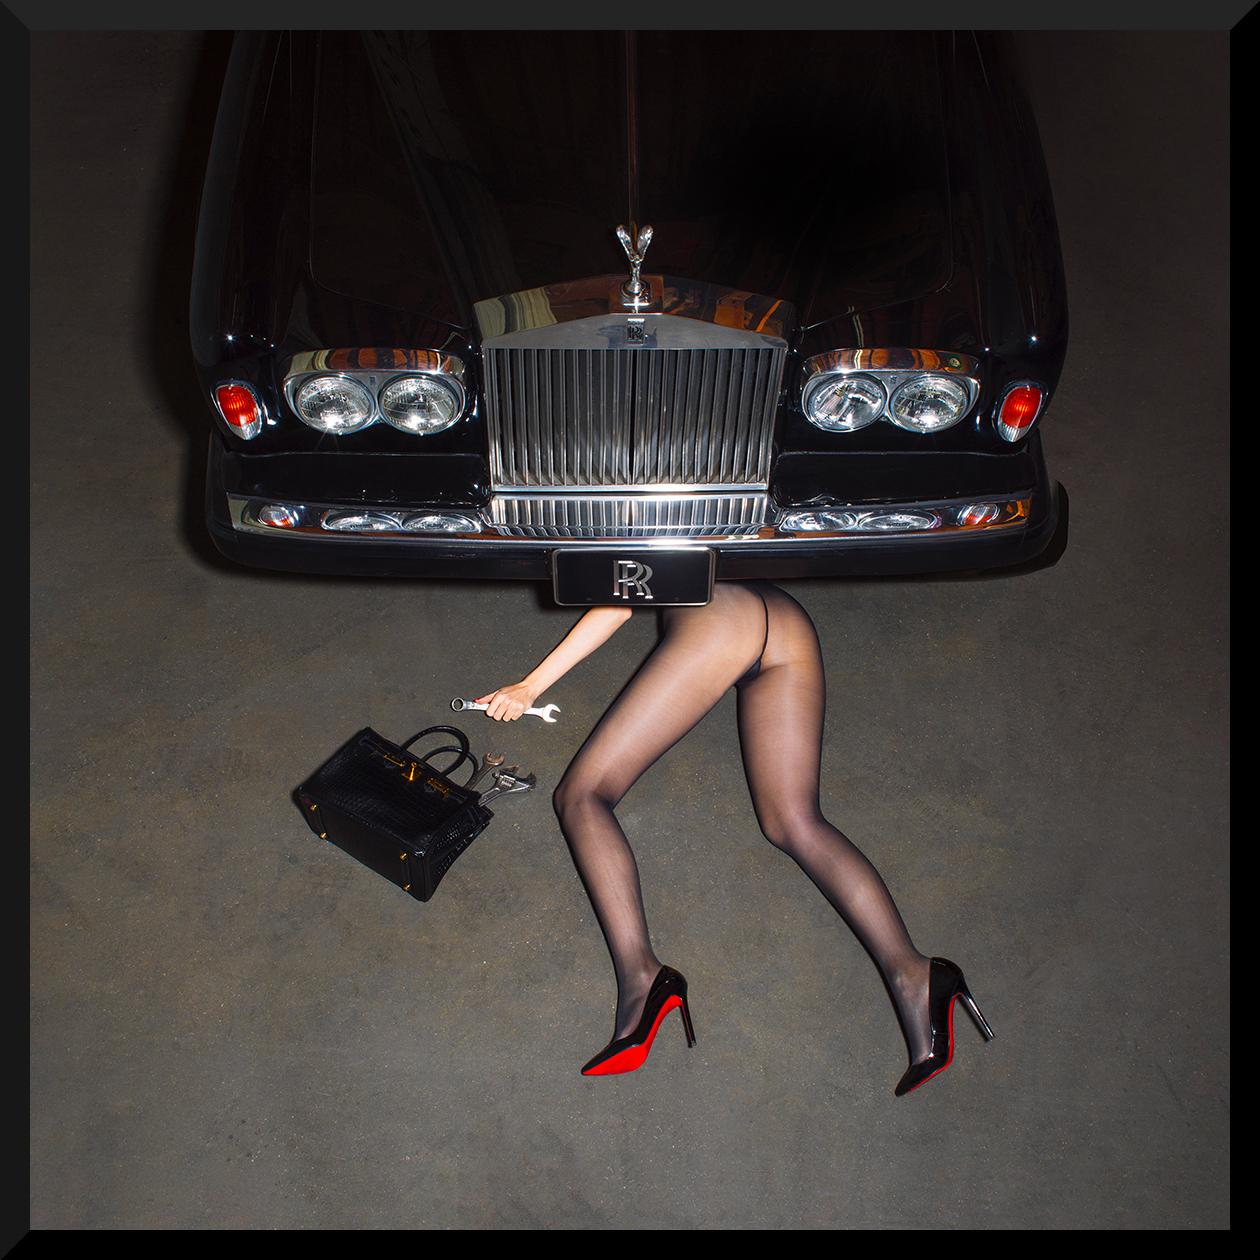 Roadside Assistance - Edition 1 of 3

Tyler Shields has made a name for himself as one of the most celebrated fine art photographers. But before the world knew Shields as the photo provocateur that he is today, he seemingly lived a life as complex